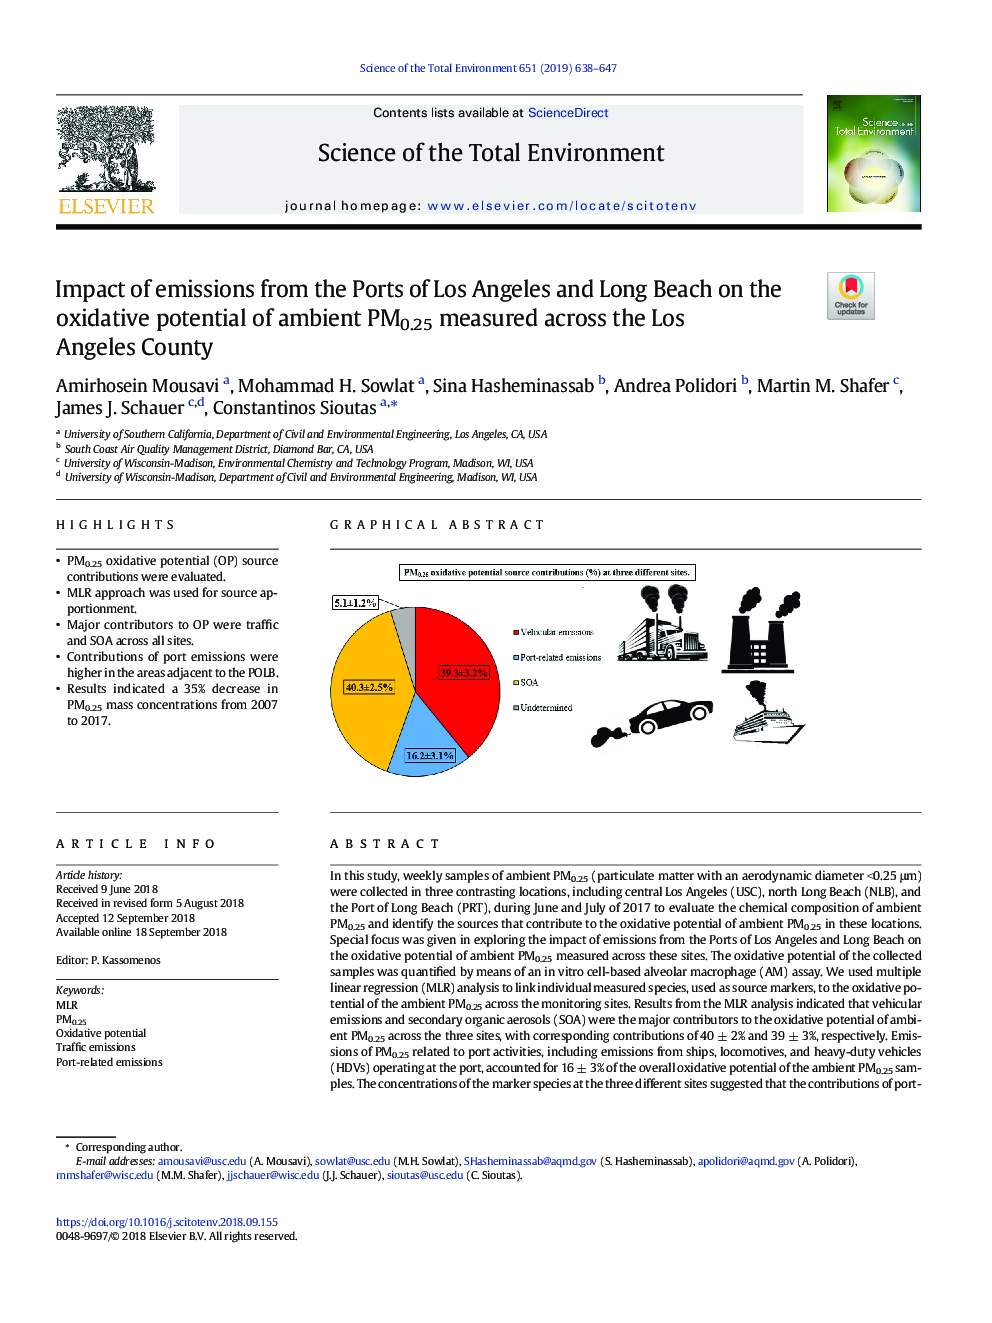 Impact of emissions from the Ports of Los Angeles and Long Beach on the oxidative potential of ambient PM0.25 measured across the Los Angeles County